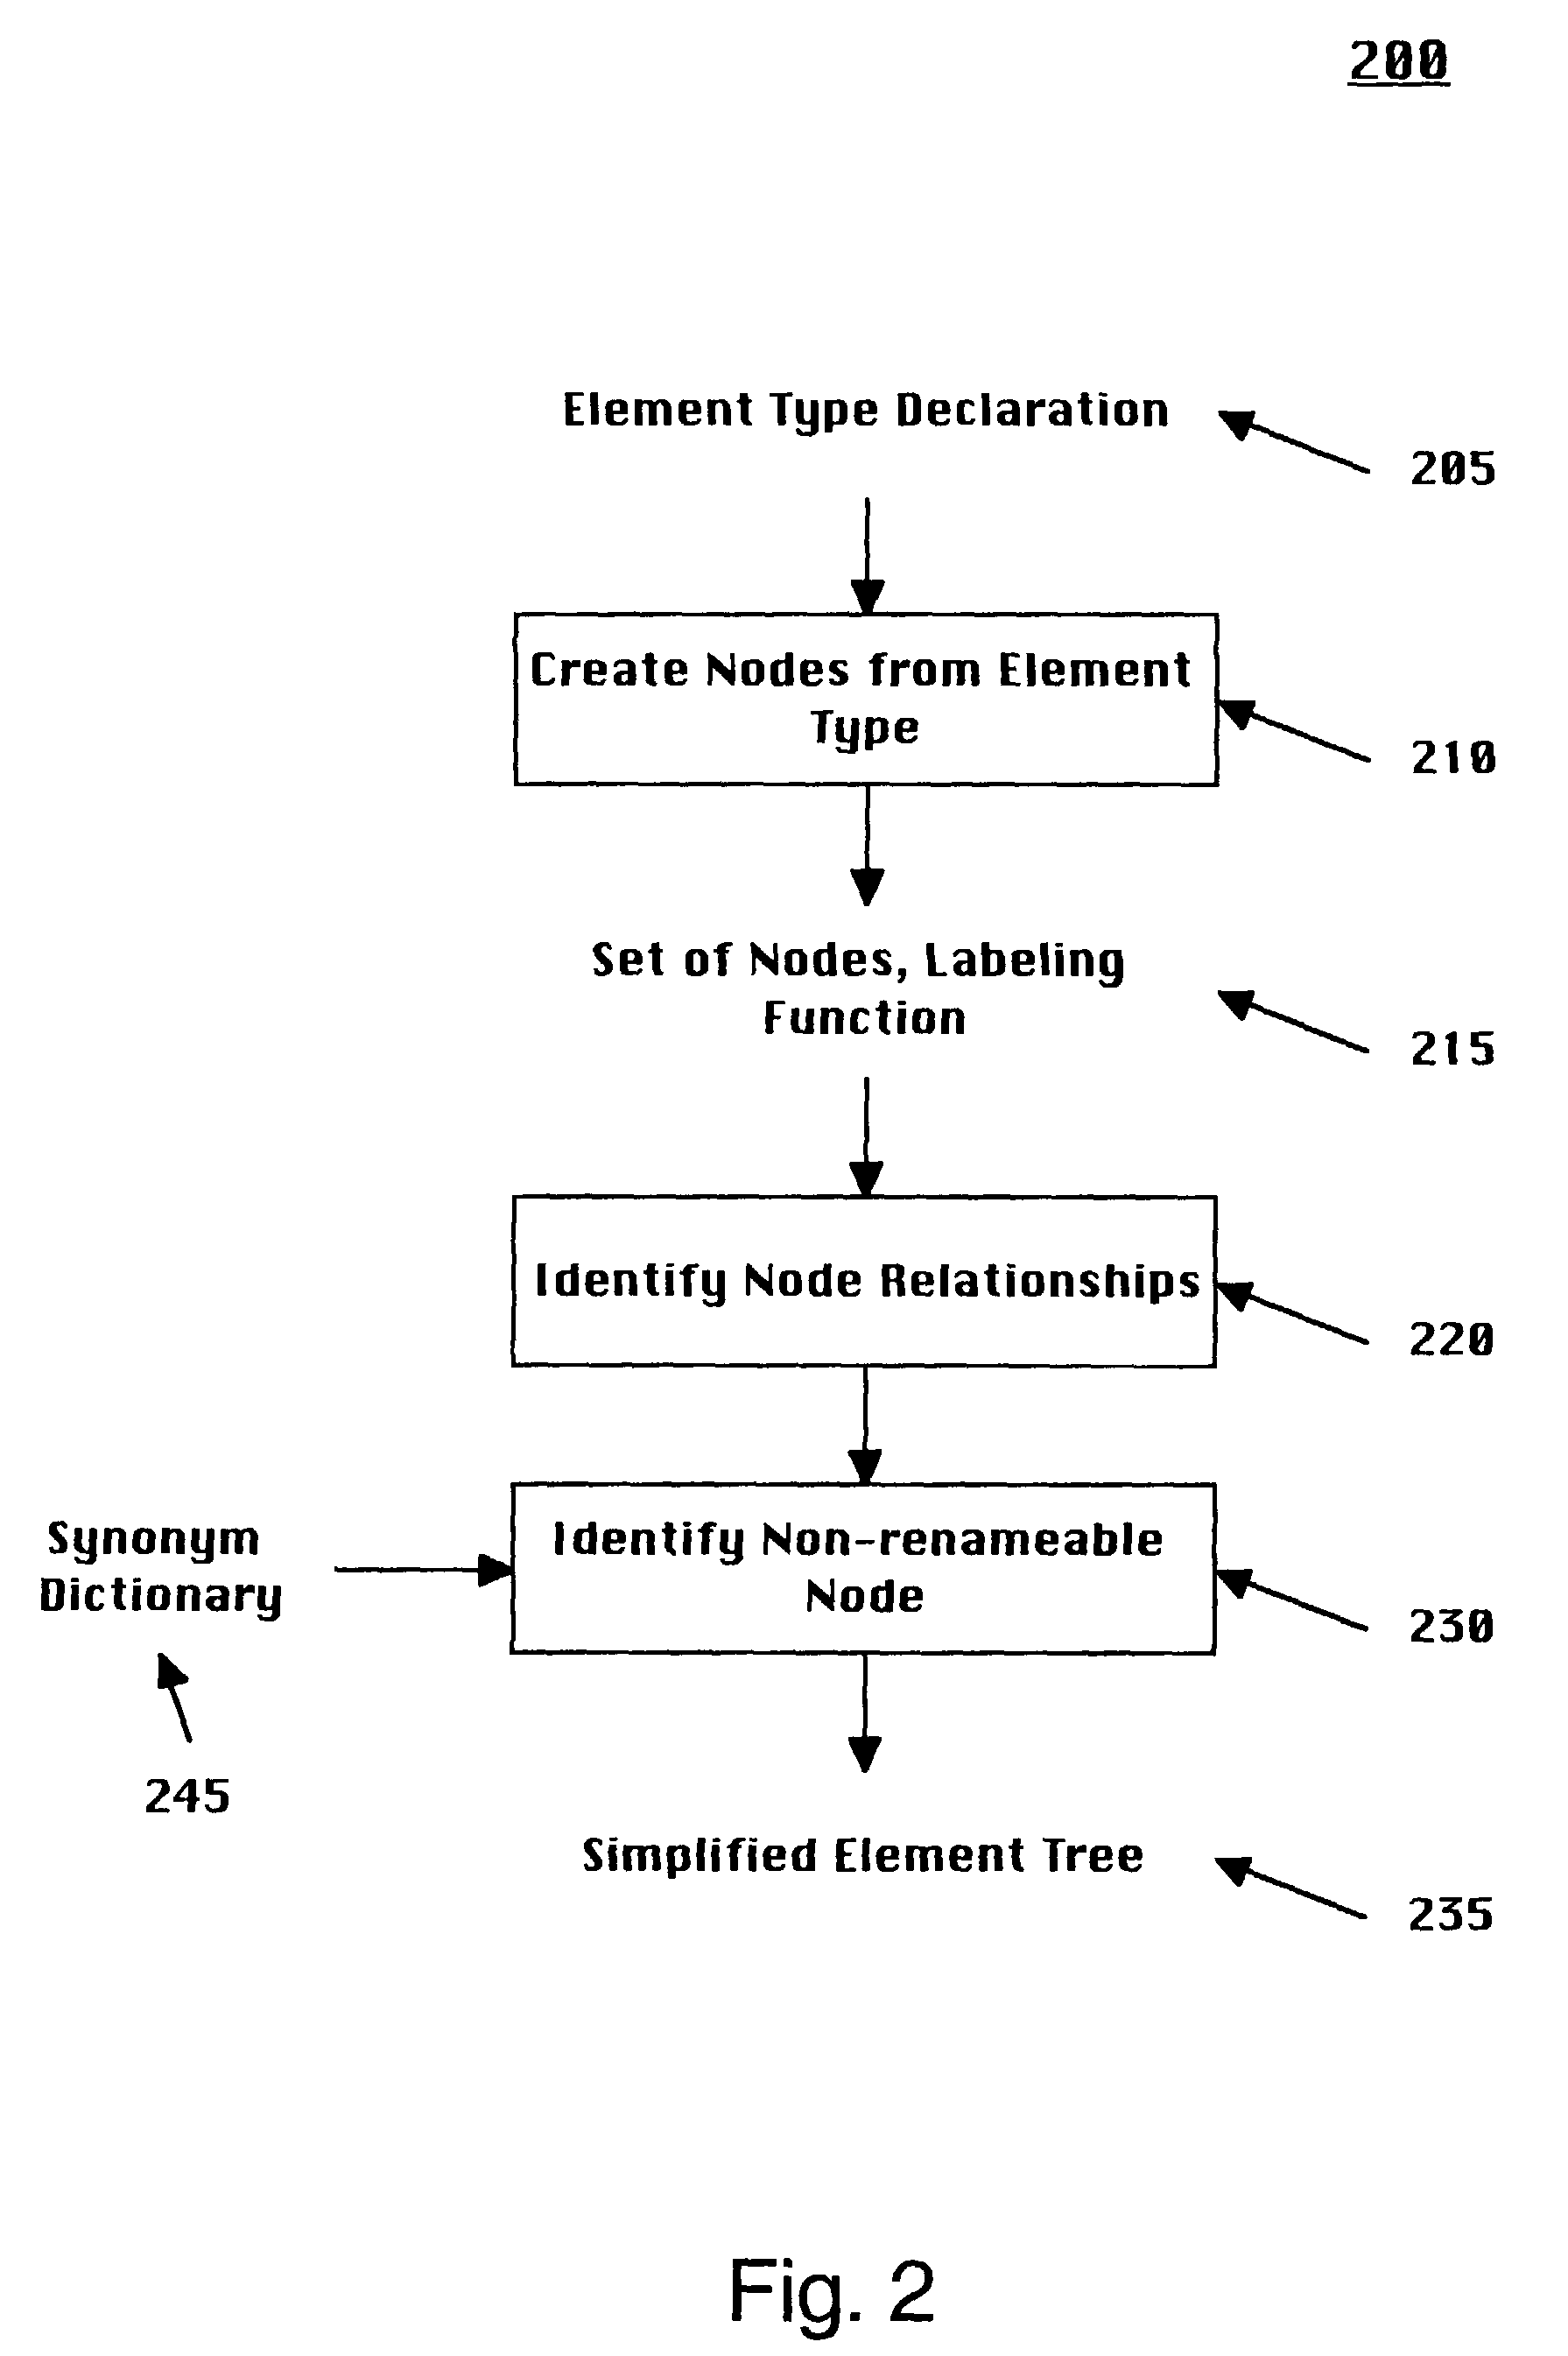 Method and system of document transformation between a source extensible markup language (XML) schema and a target XML schema